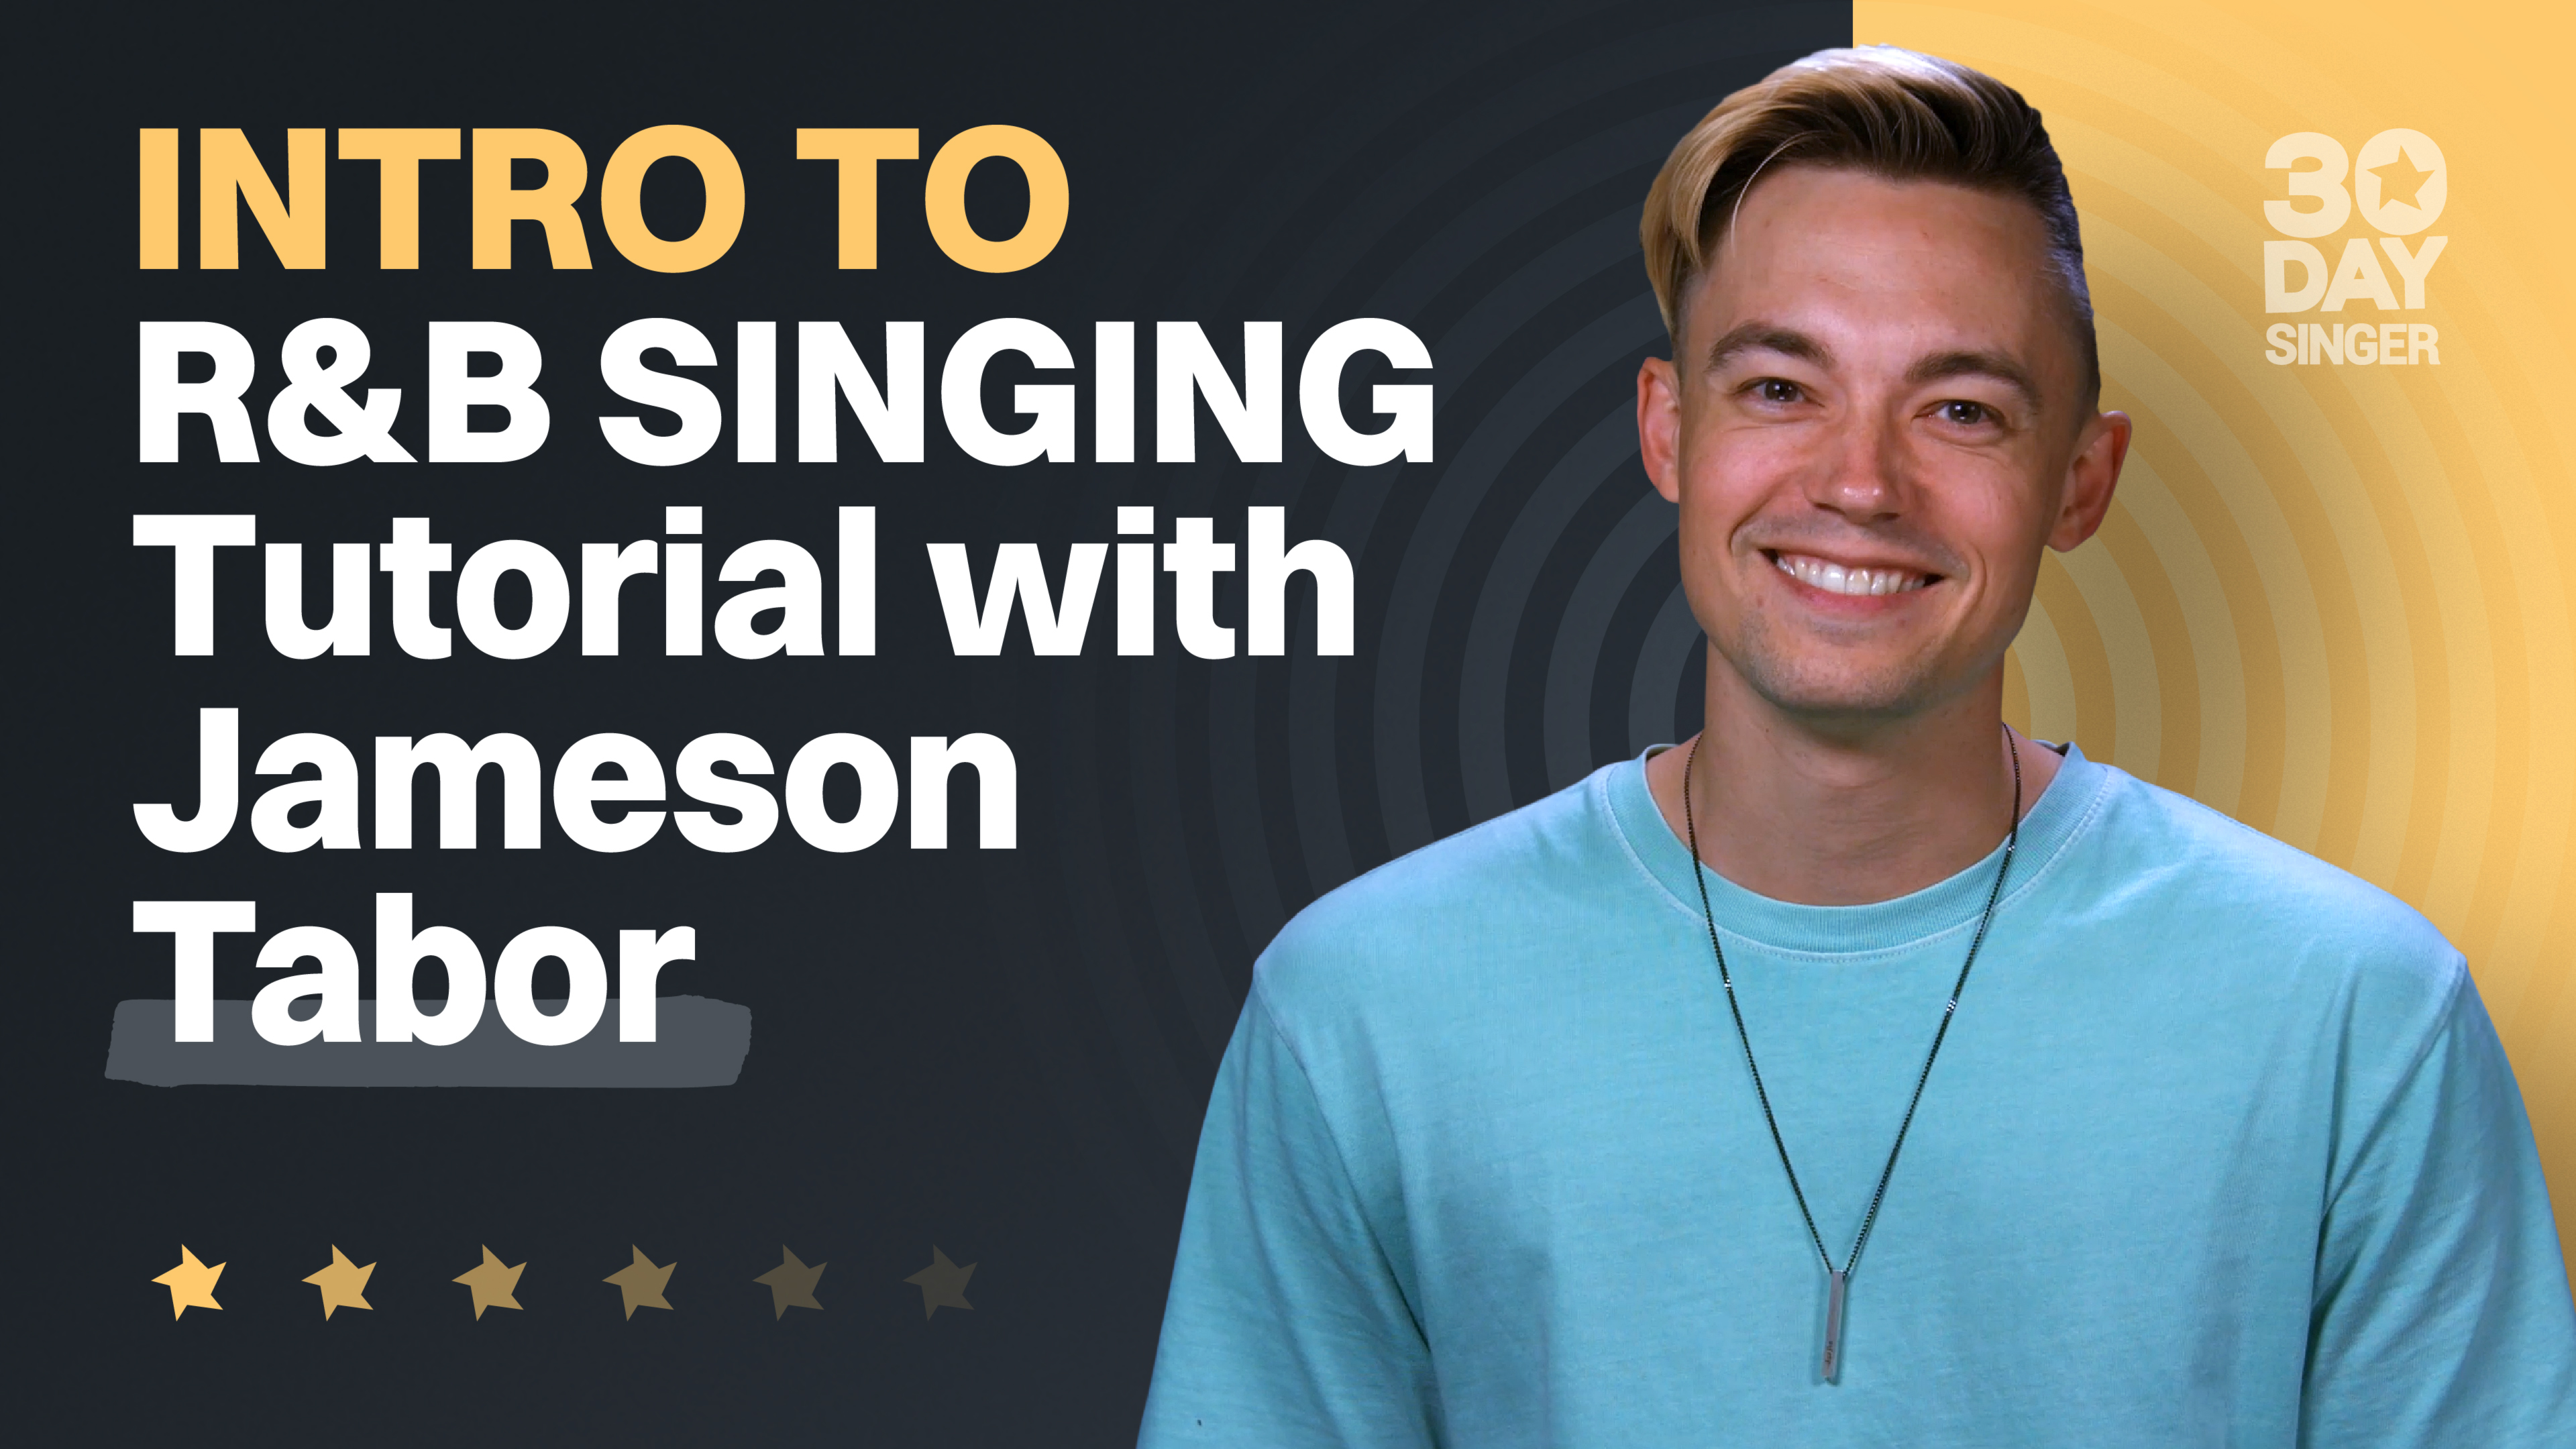 Intro to R&B Singing Tutorial with Jameson Tabor